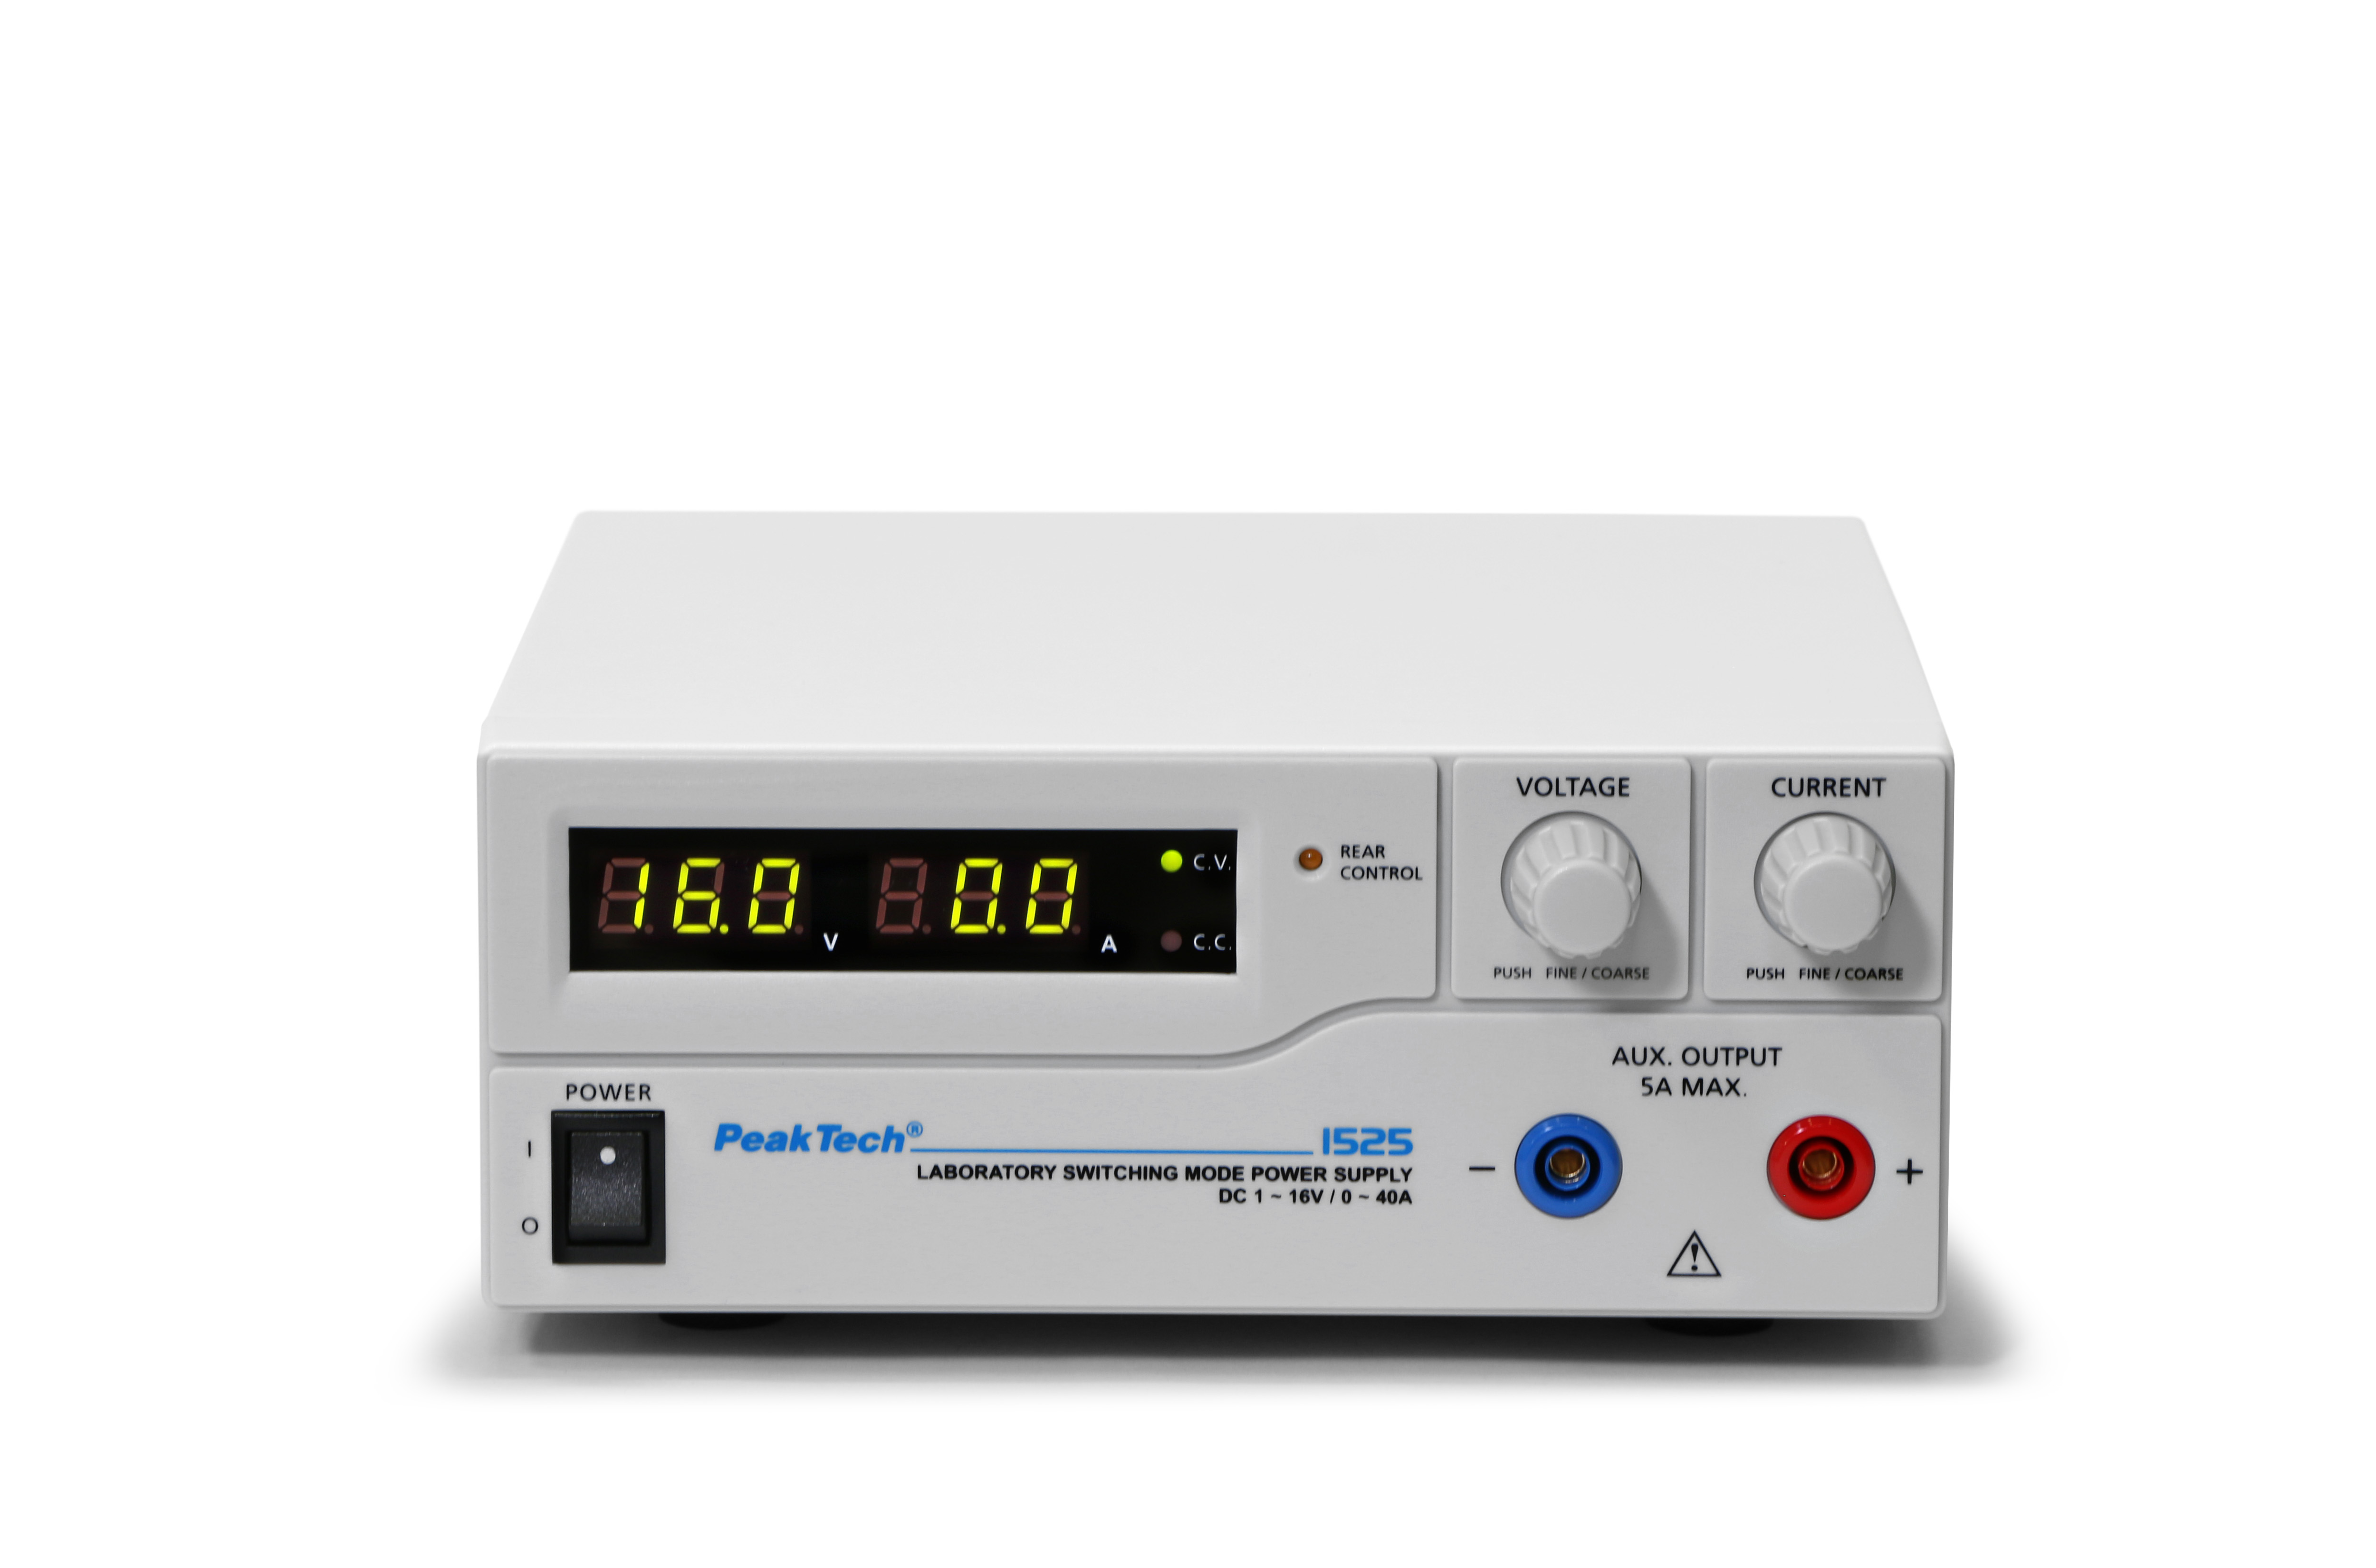 «PeakTech® P 1525» Laboratory power supply DC 1 - 16 V / 0 - 40 A